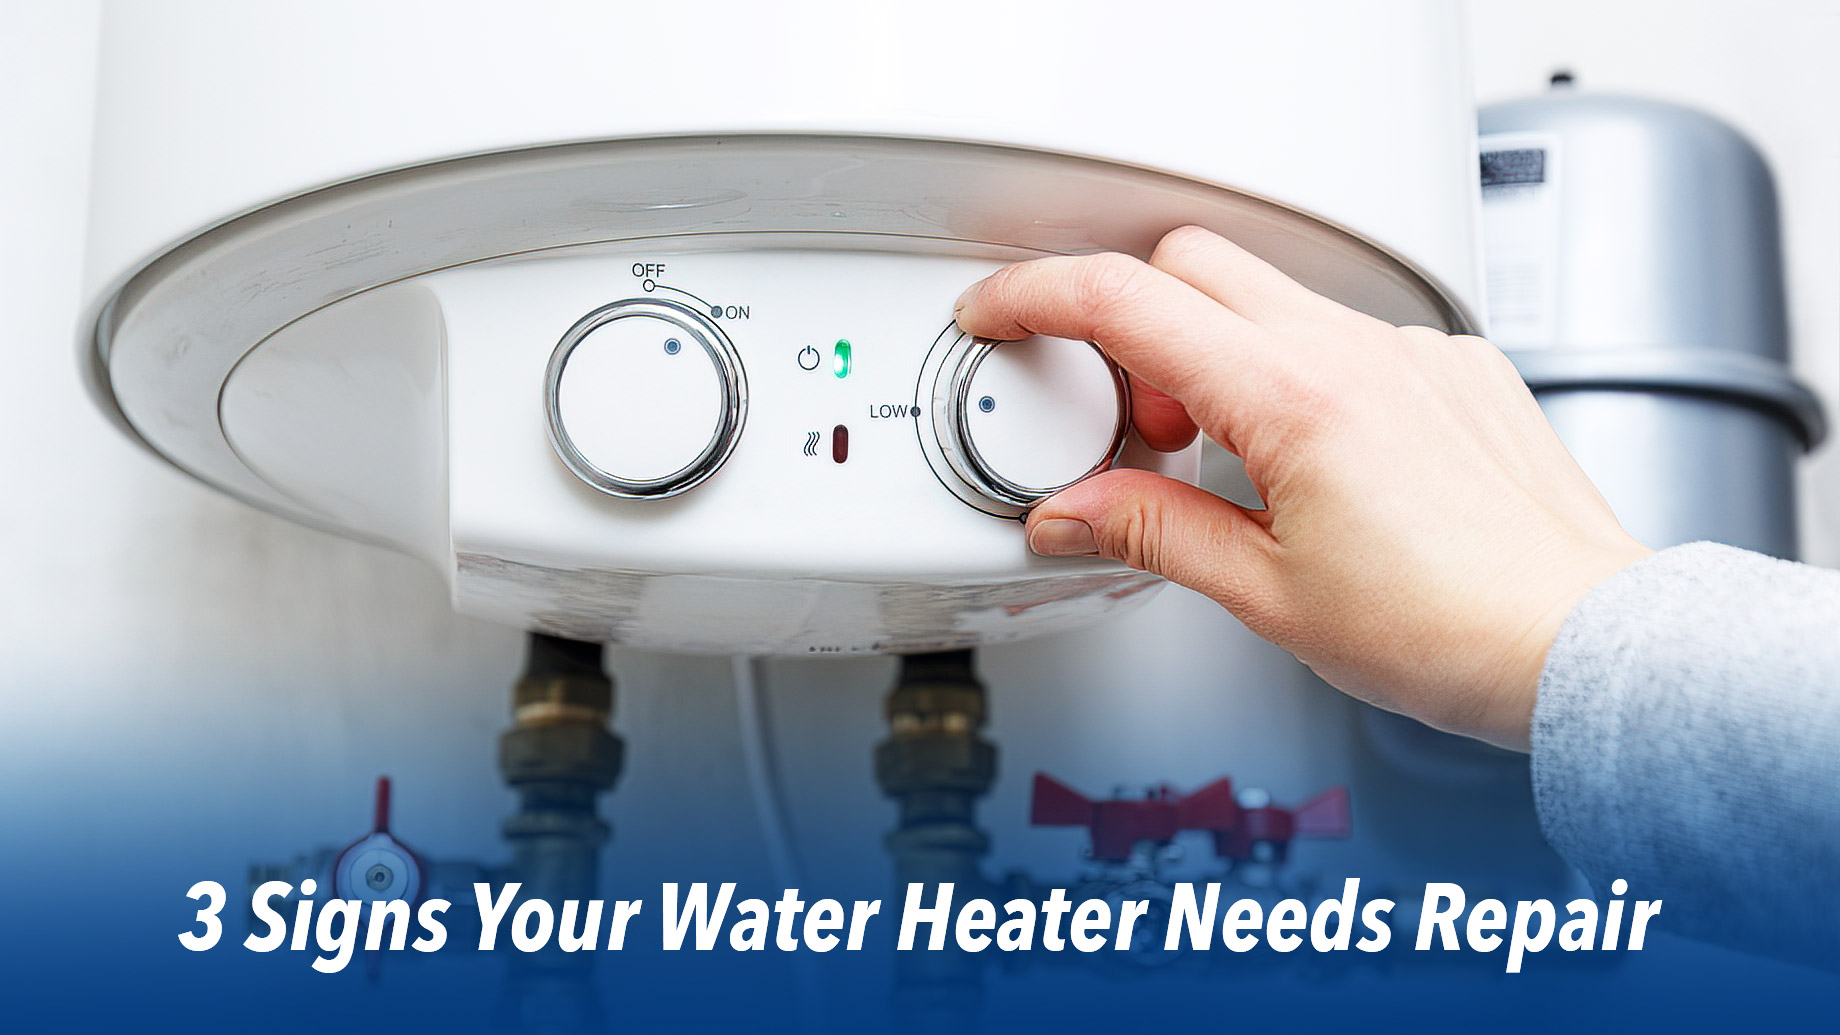 3 Signs Your Water Heater Needs Repair